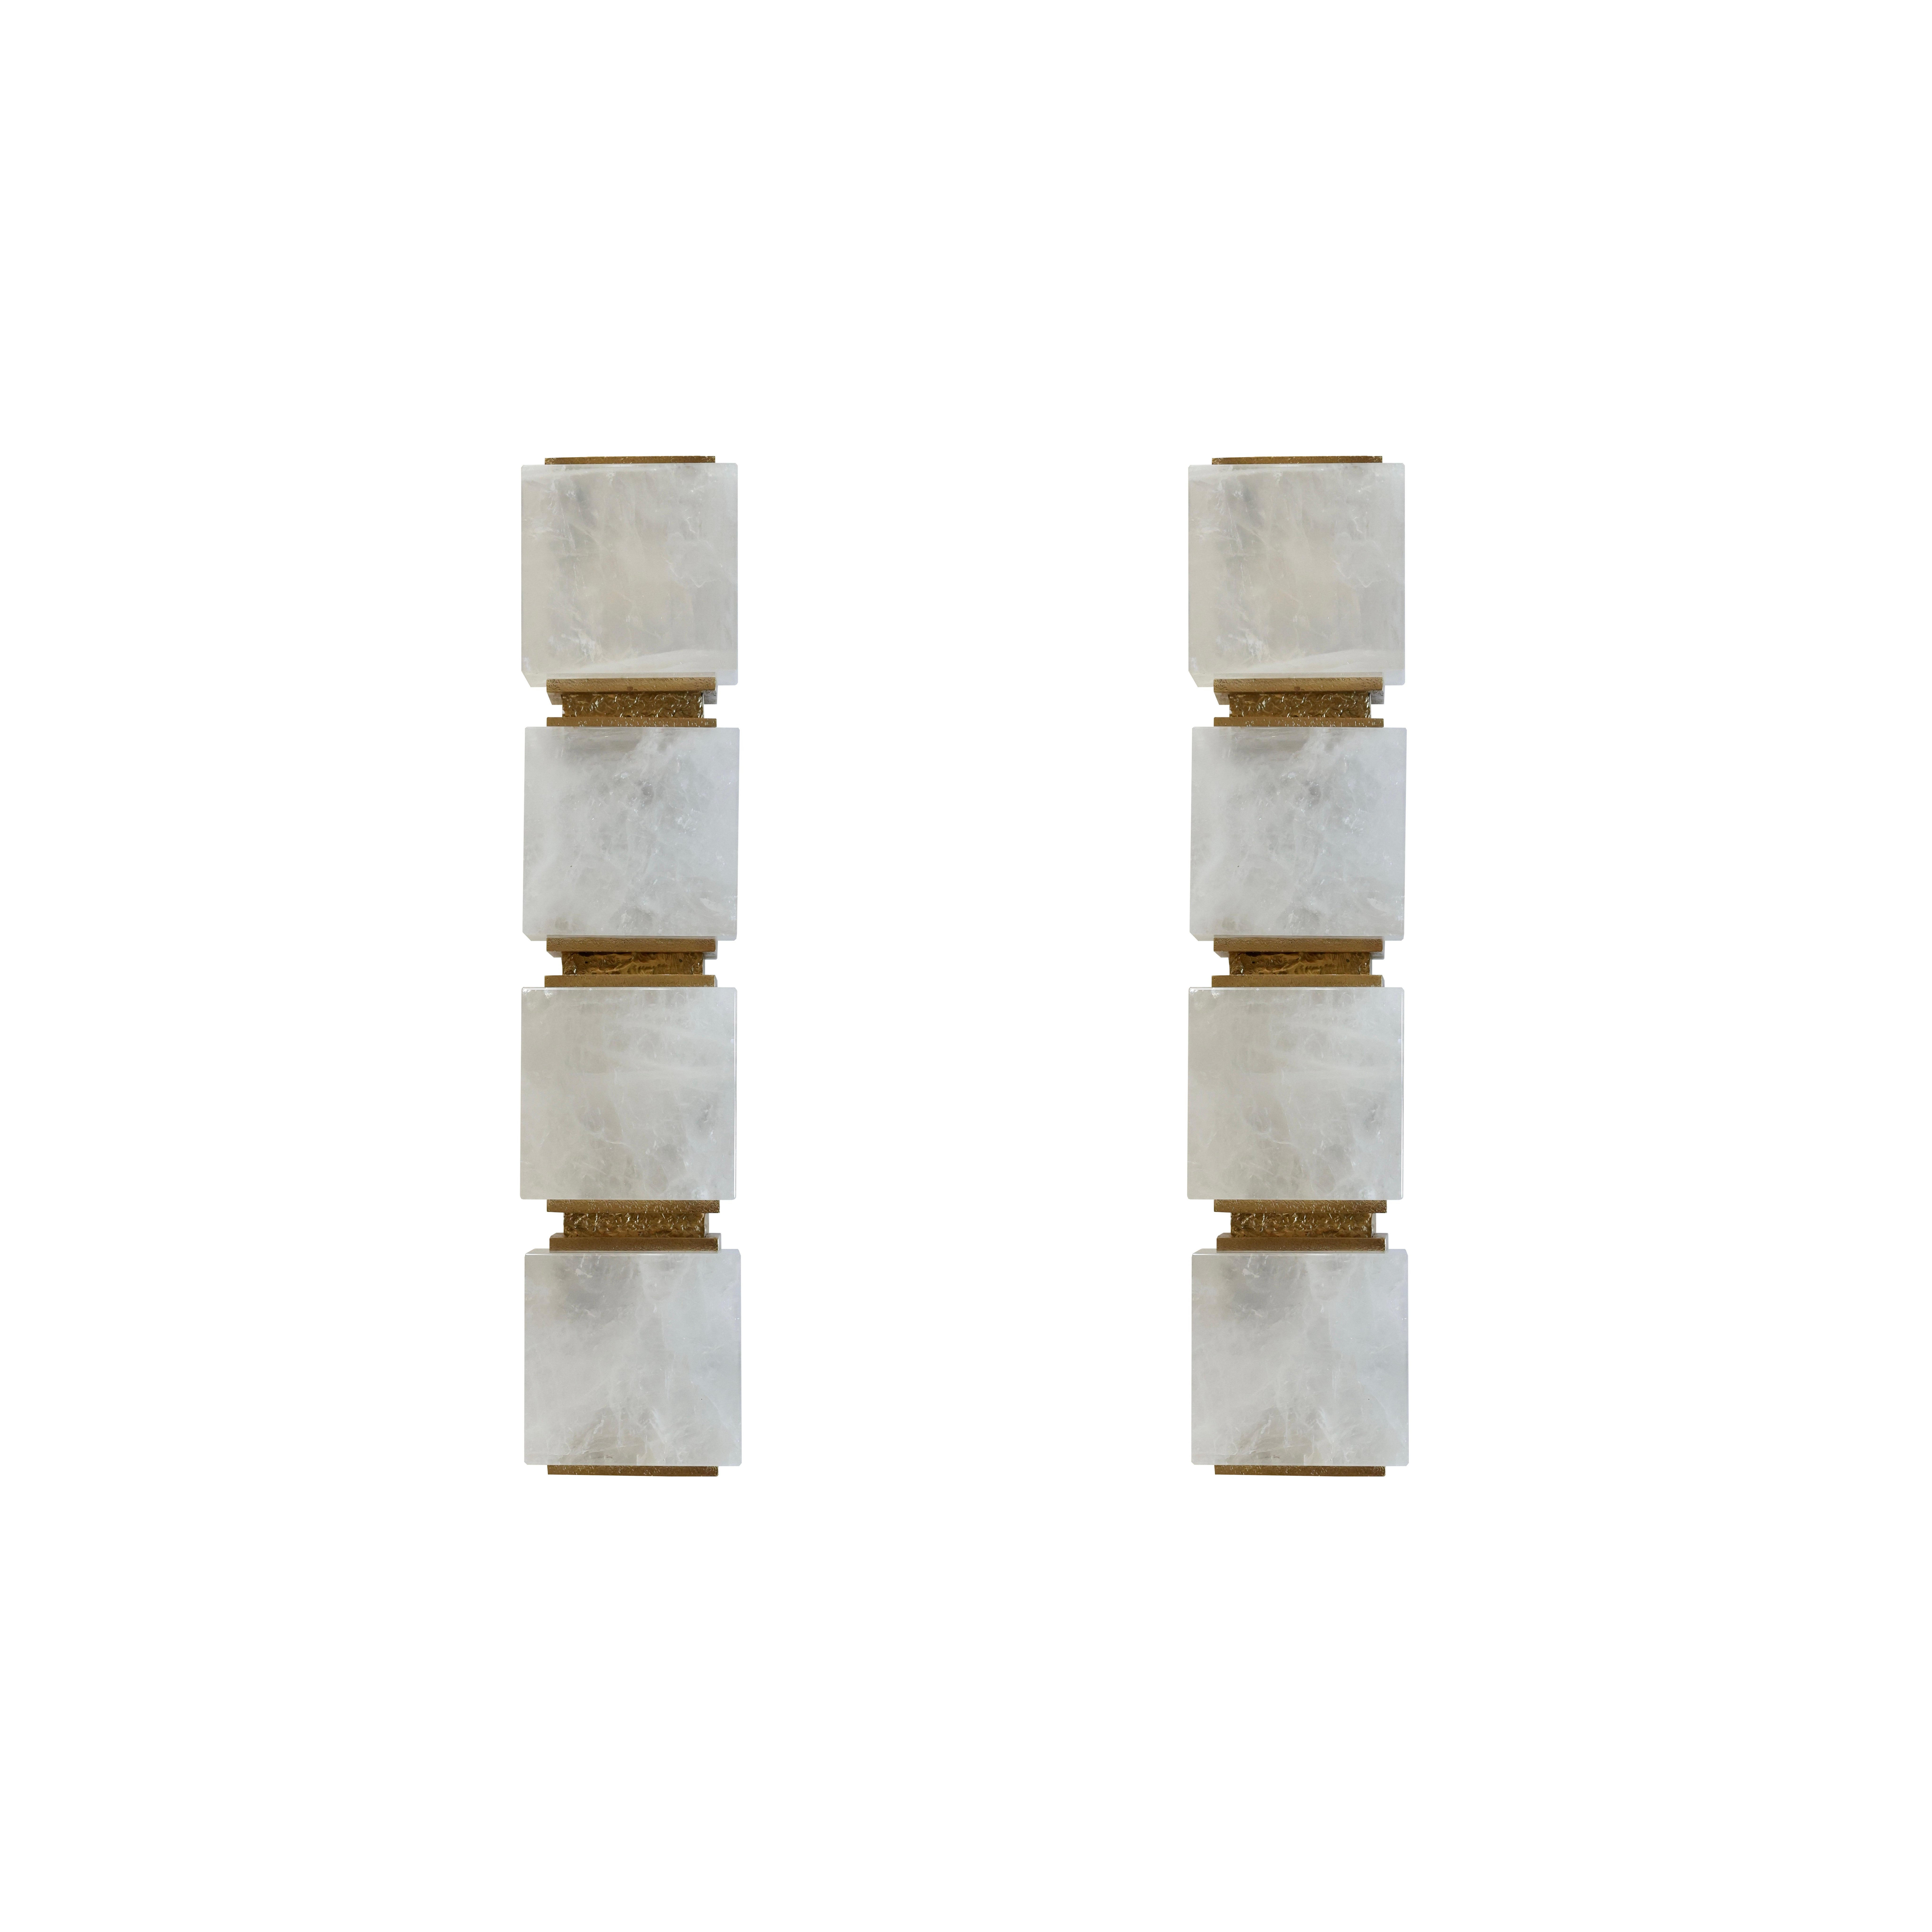 Pair of block form rock crystal sconces with hammered polish brass decorations.
Created by Phoenix, each sconce installed four sockets, 240w total.